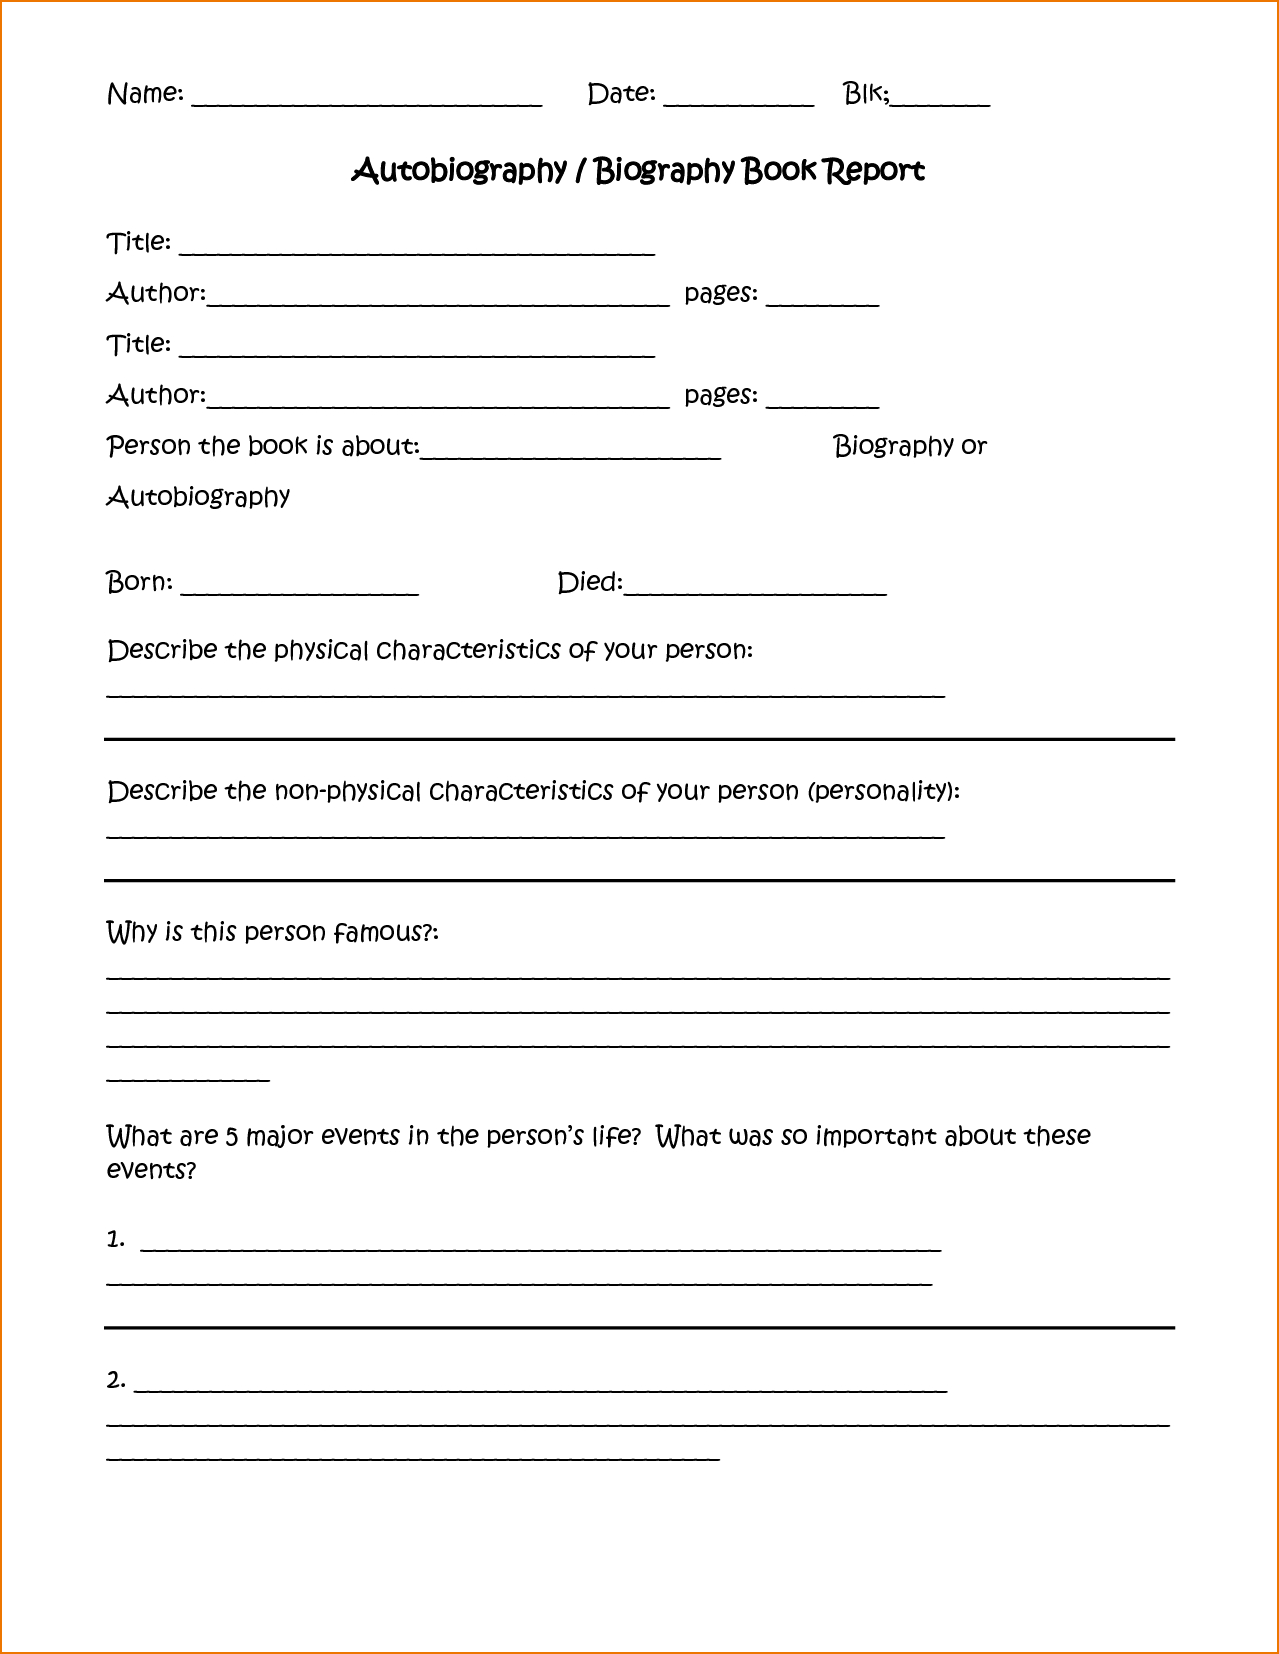 4+ Biography Report Template | Teknoswitch Within Biography Book Report Template